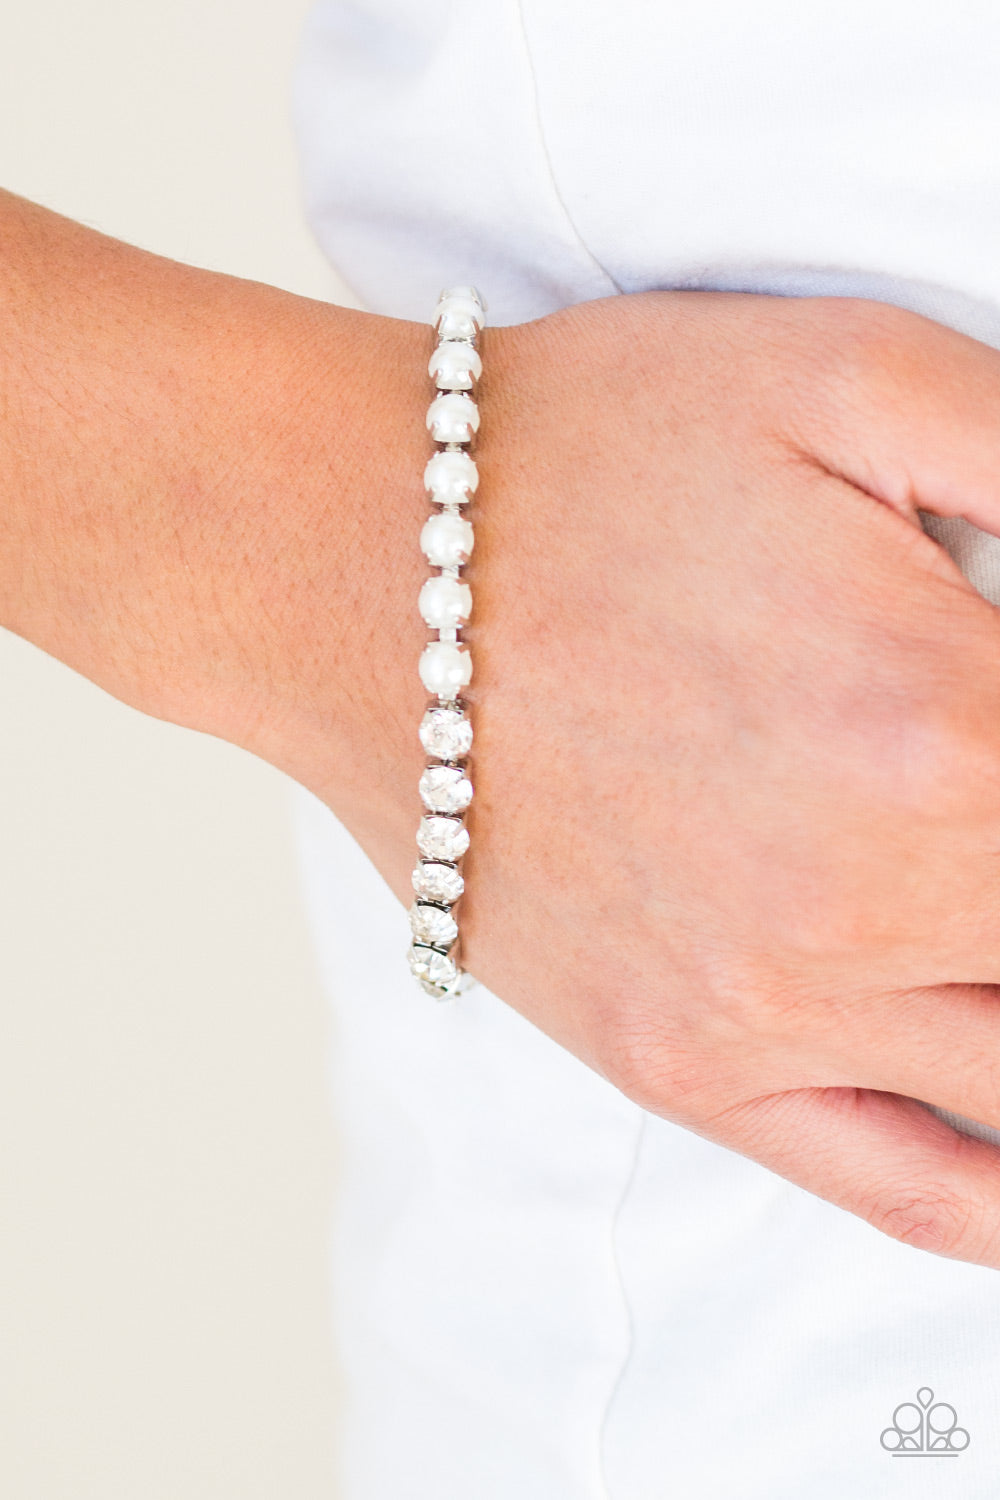 Out Like A SOCIALITE- White and Silver Bracelet- Paparazzi Accessories